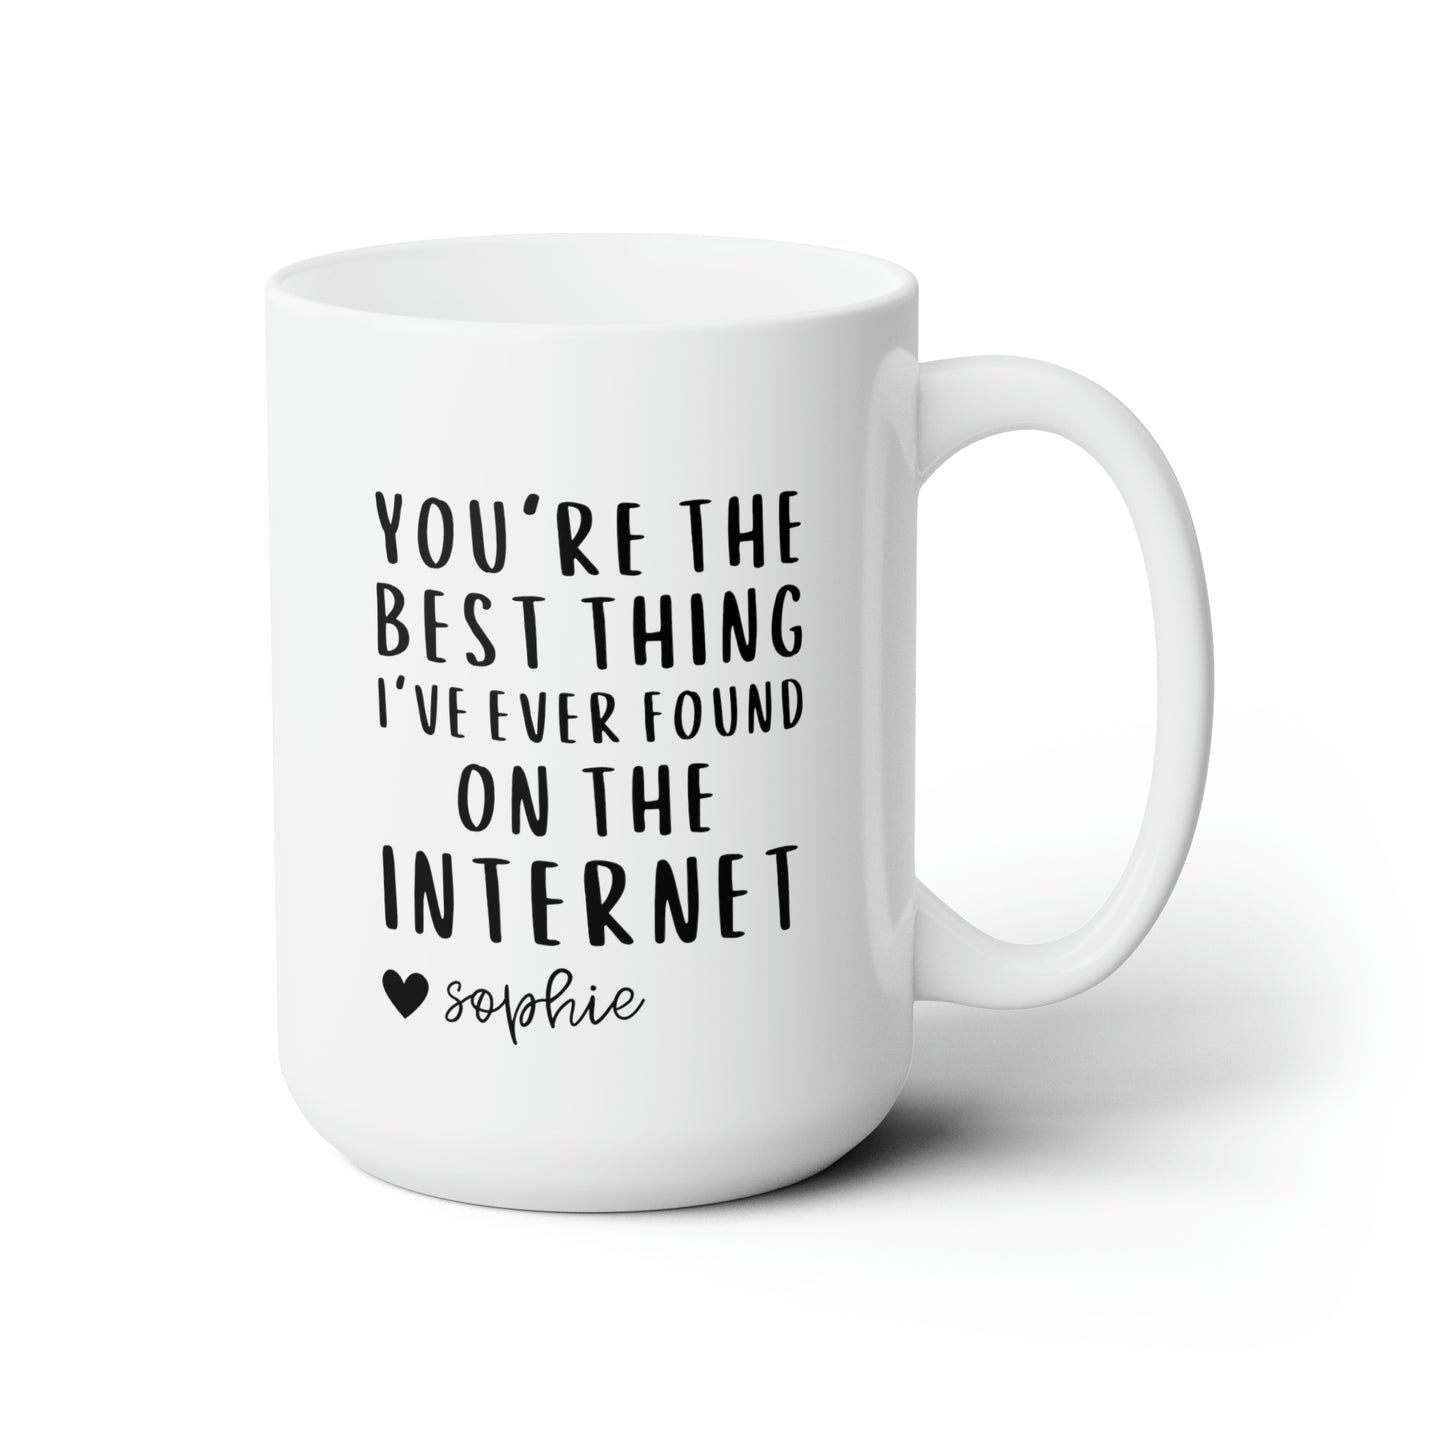 you are the best thing ive ever found on the internet personalized custom 15oz white mug funny coffee mug tea cup gift valentines anniversary boyfriend girlfriend online dating match waveywares wavey wares large big mug